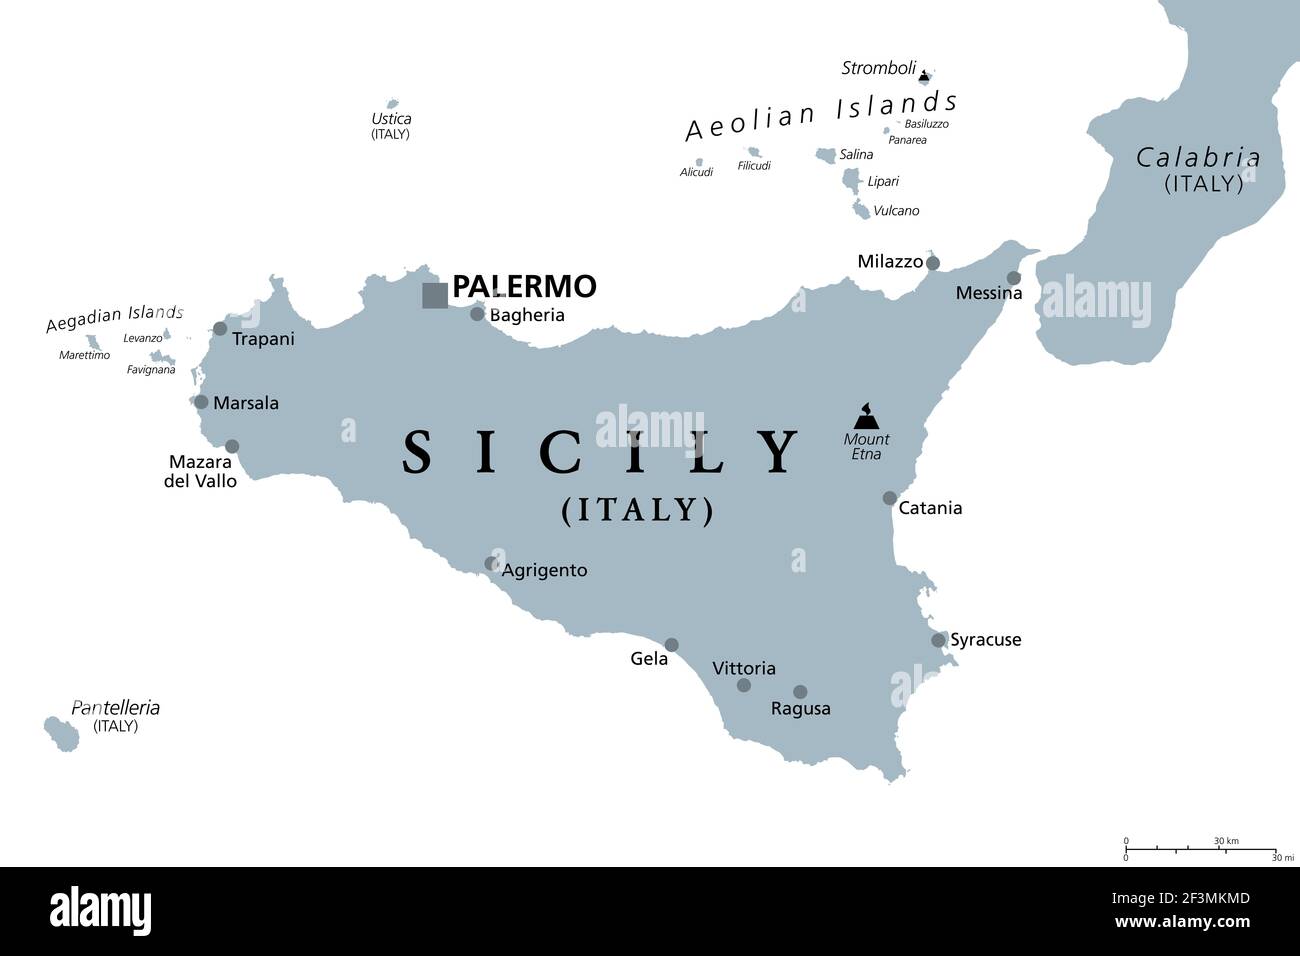 Sicily, autonomous region of Italy, gray political map, with capital Palermo, Aeolian and Aegadian Islands, volcano Etna and important cities. Stock Photo